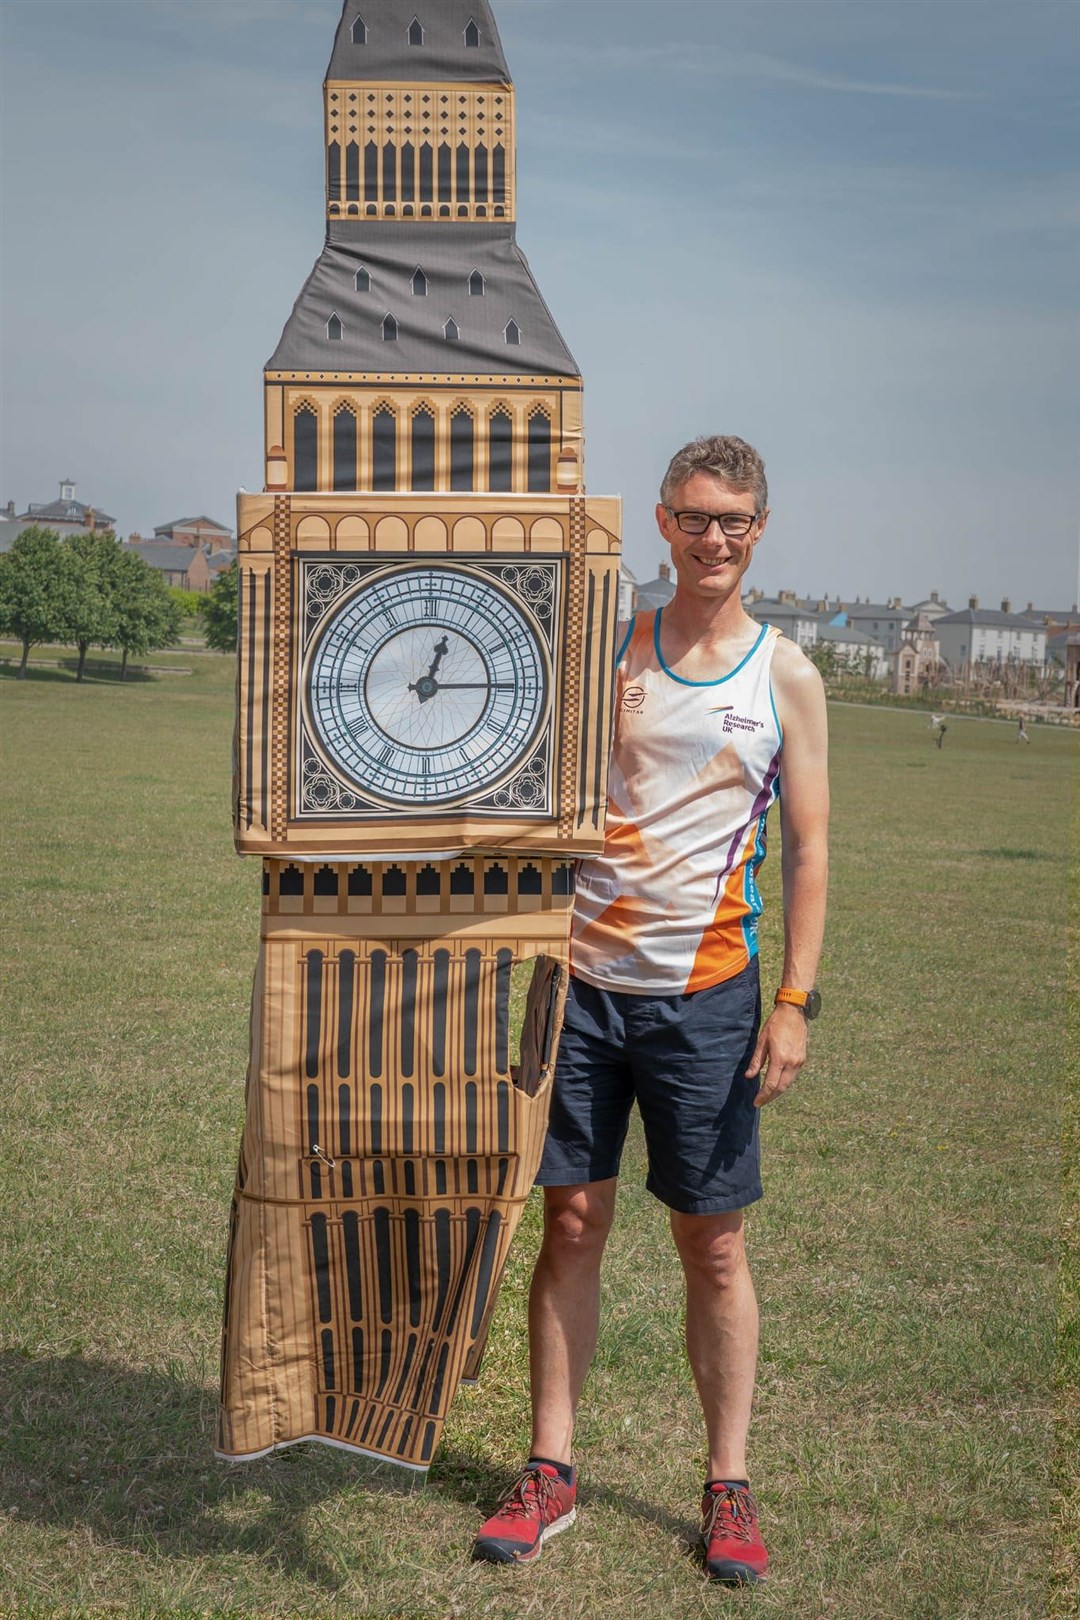 Simon Phillips, a GP from Dorset, will run dressed as Big Ben for Alzheimer’s Research UK (Simon Phillips/PA)